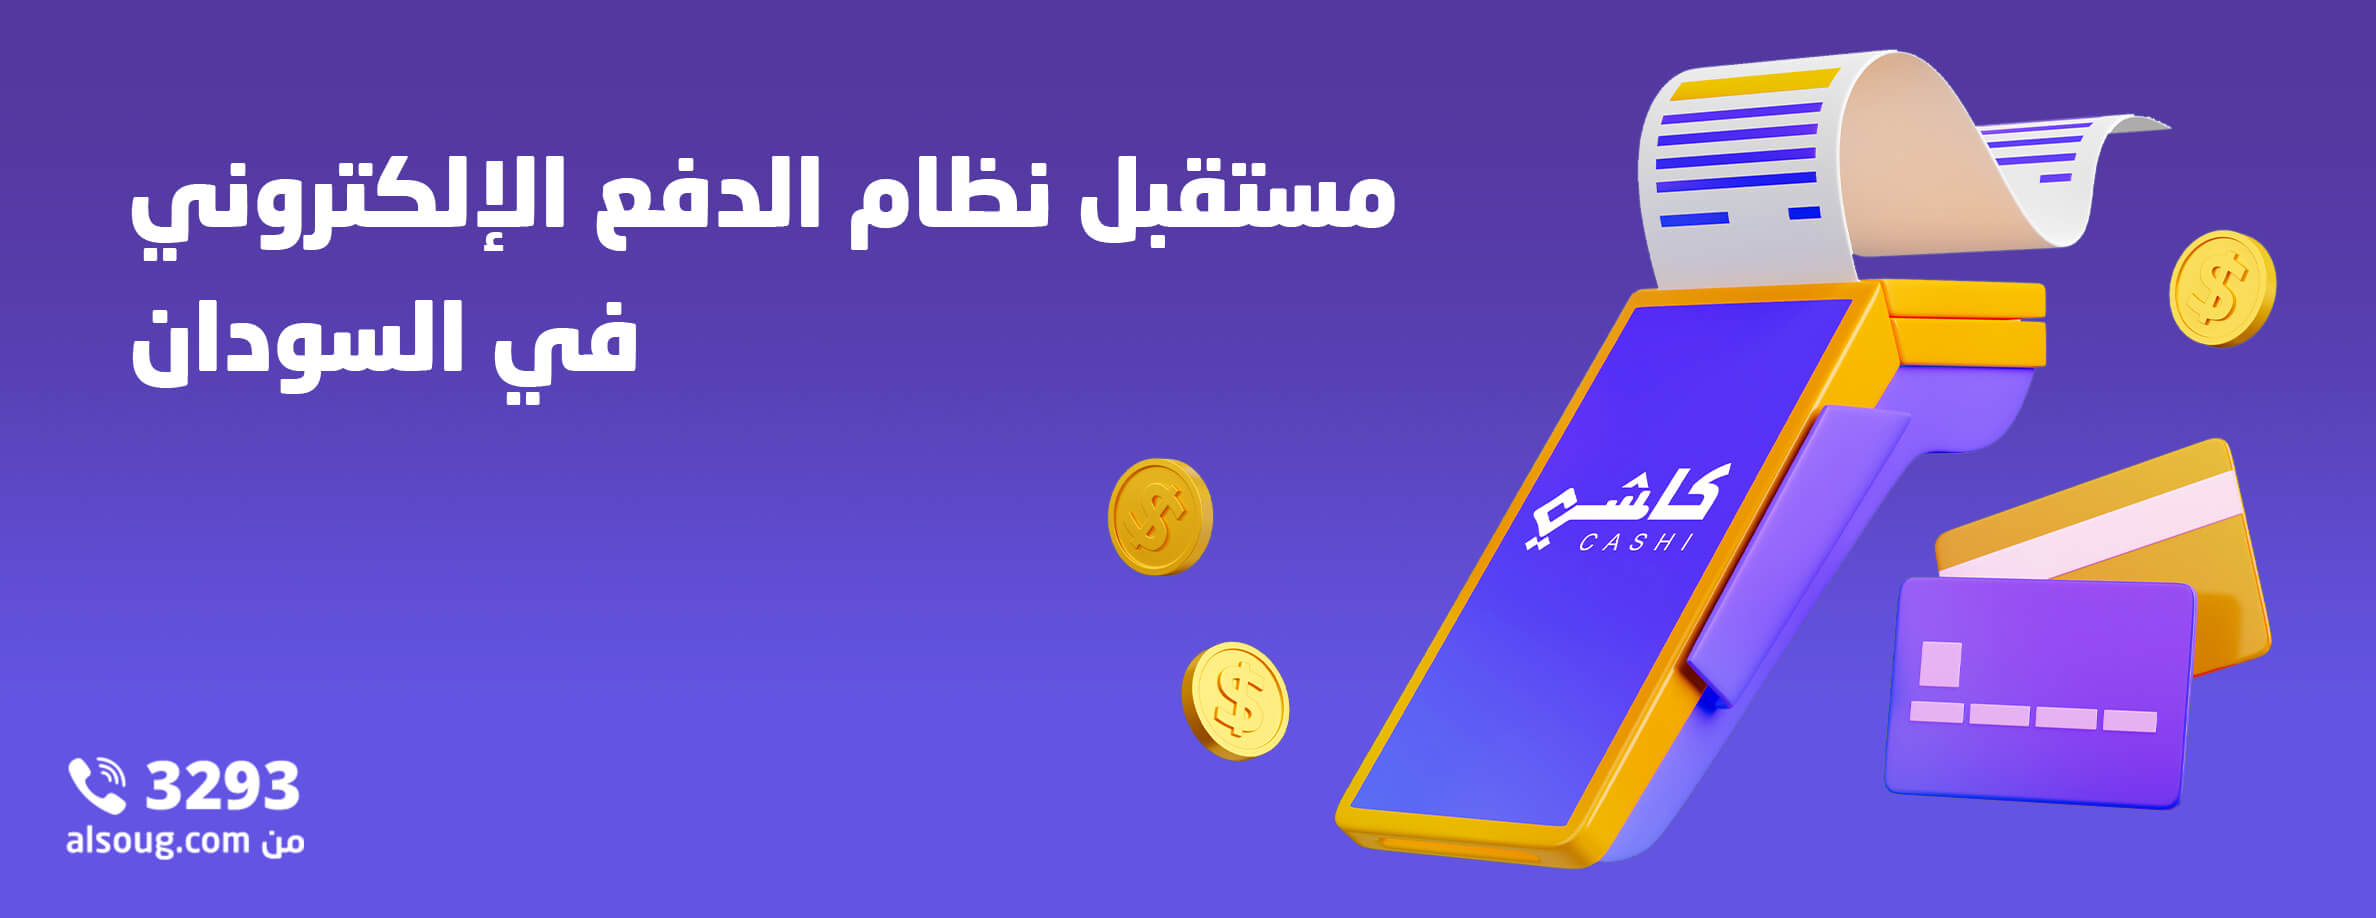 The future of the electronic payment system in sudan